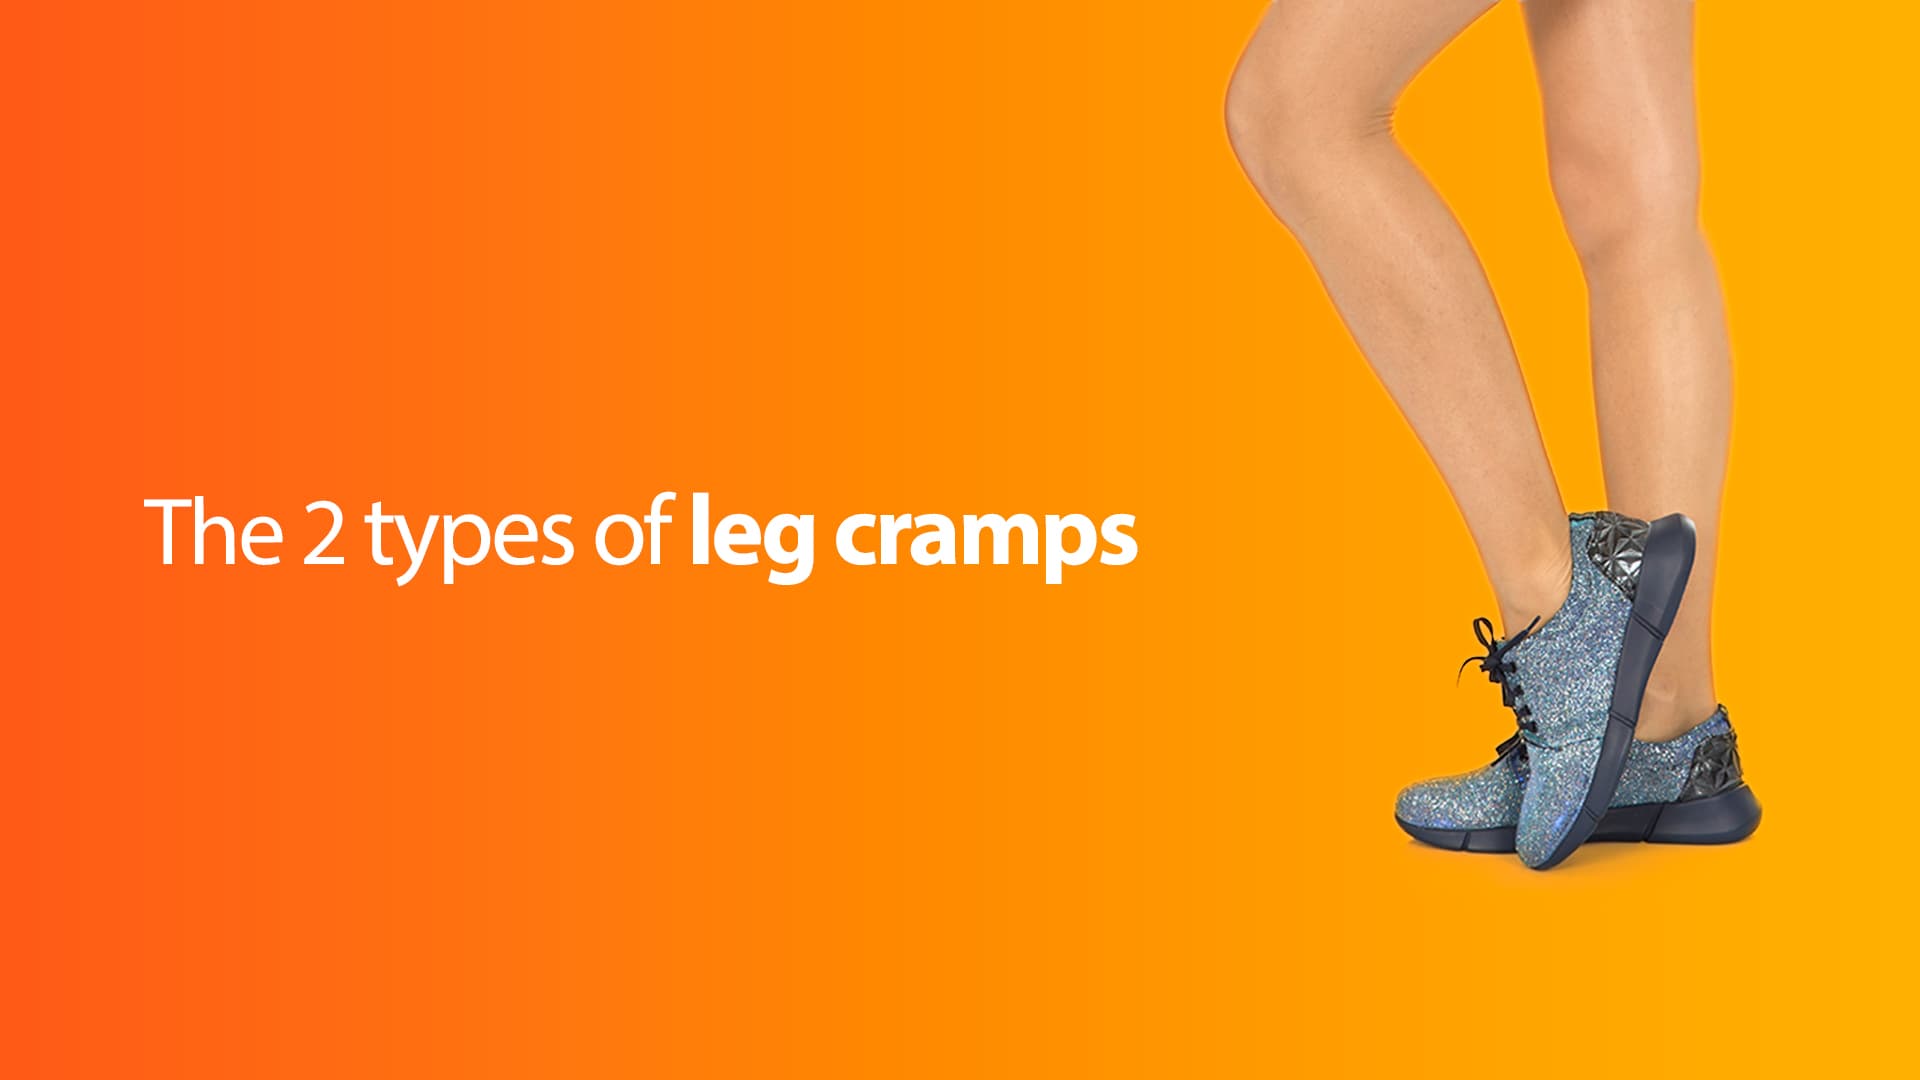 There are 2 Types of Leg Cramps, and They're Both Caused by Deficiencies